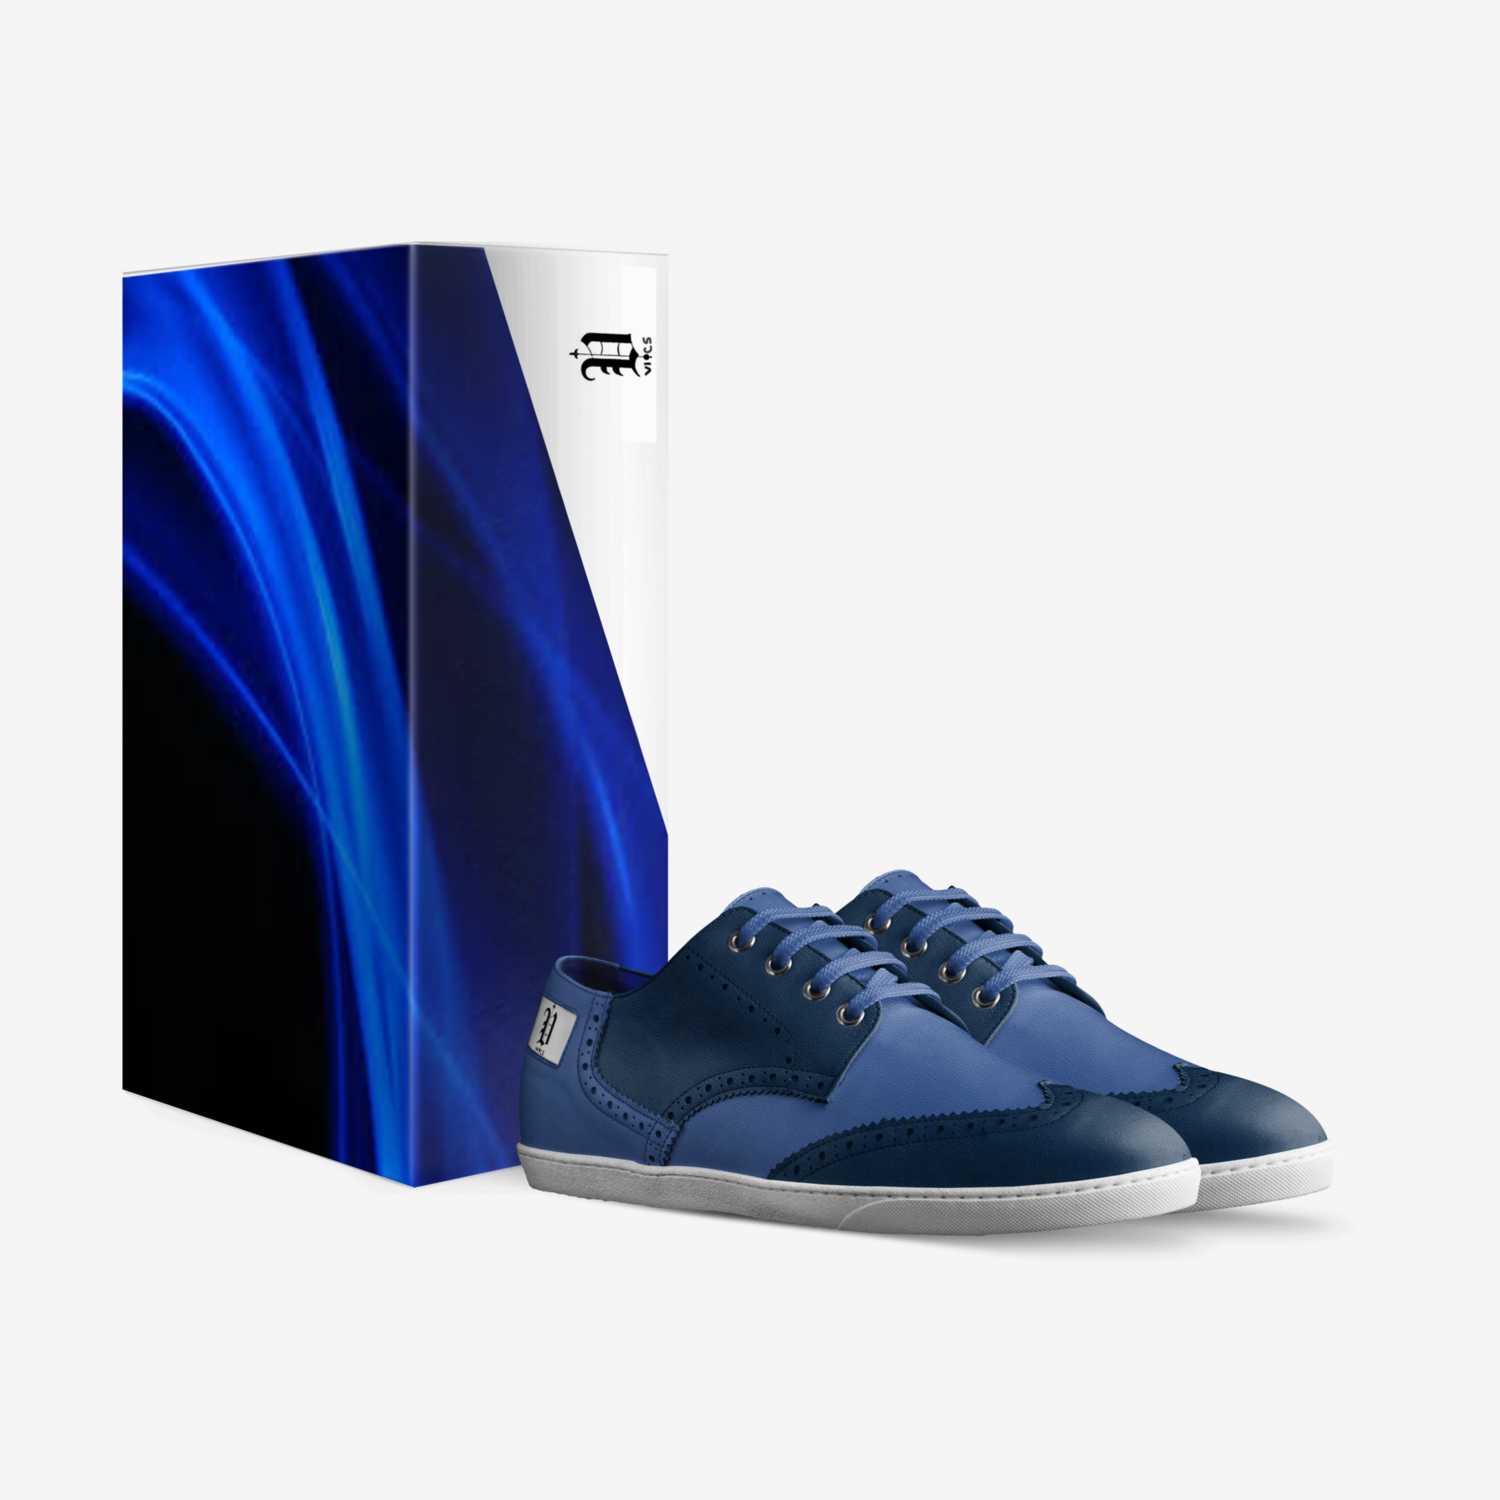 vics blue style custom made in Italy shoes by Brayden Murphy | Box view